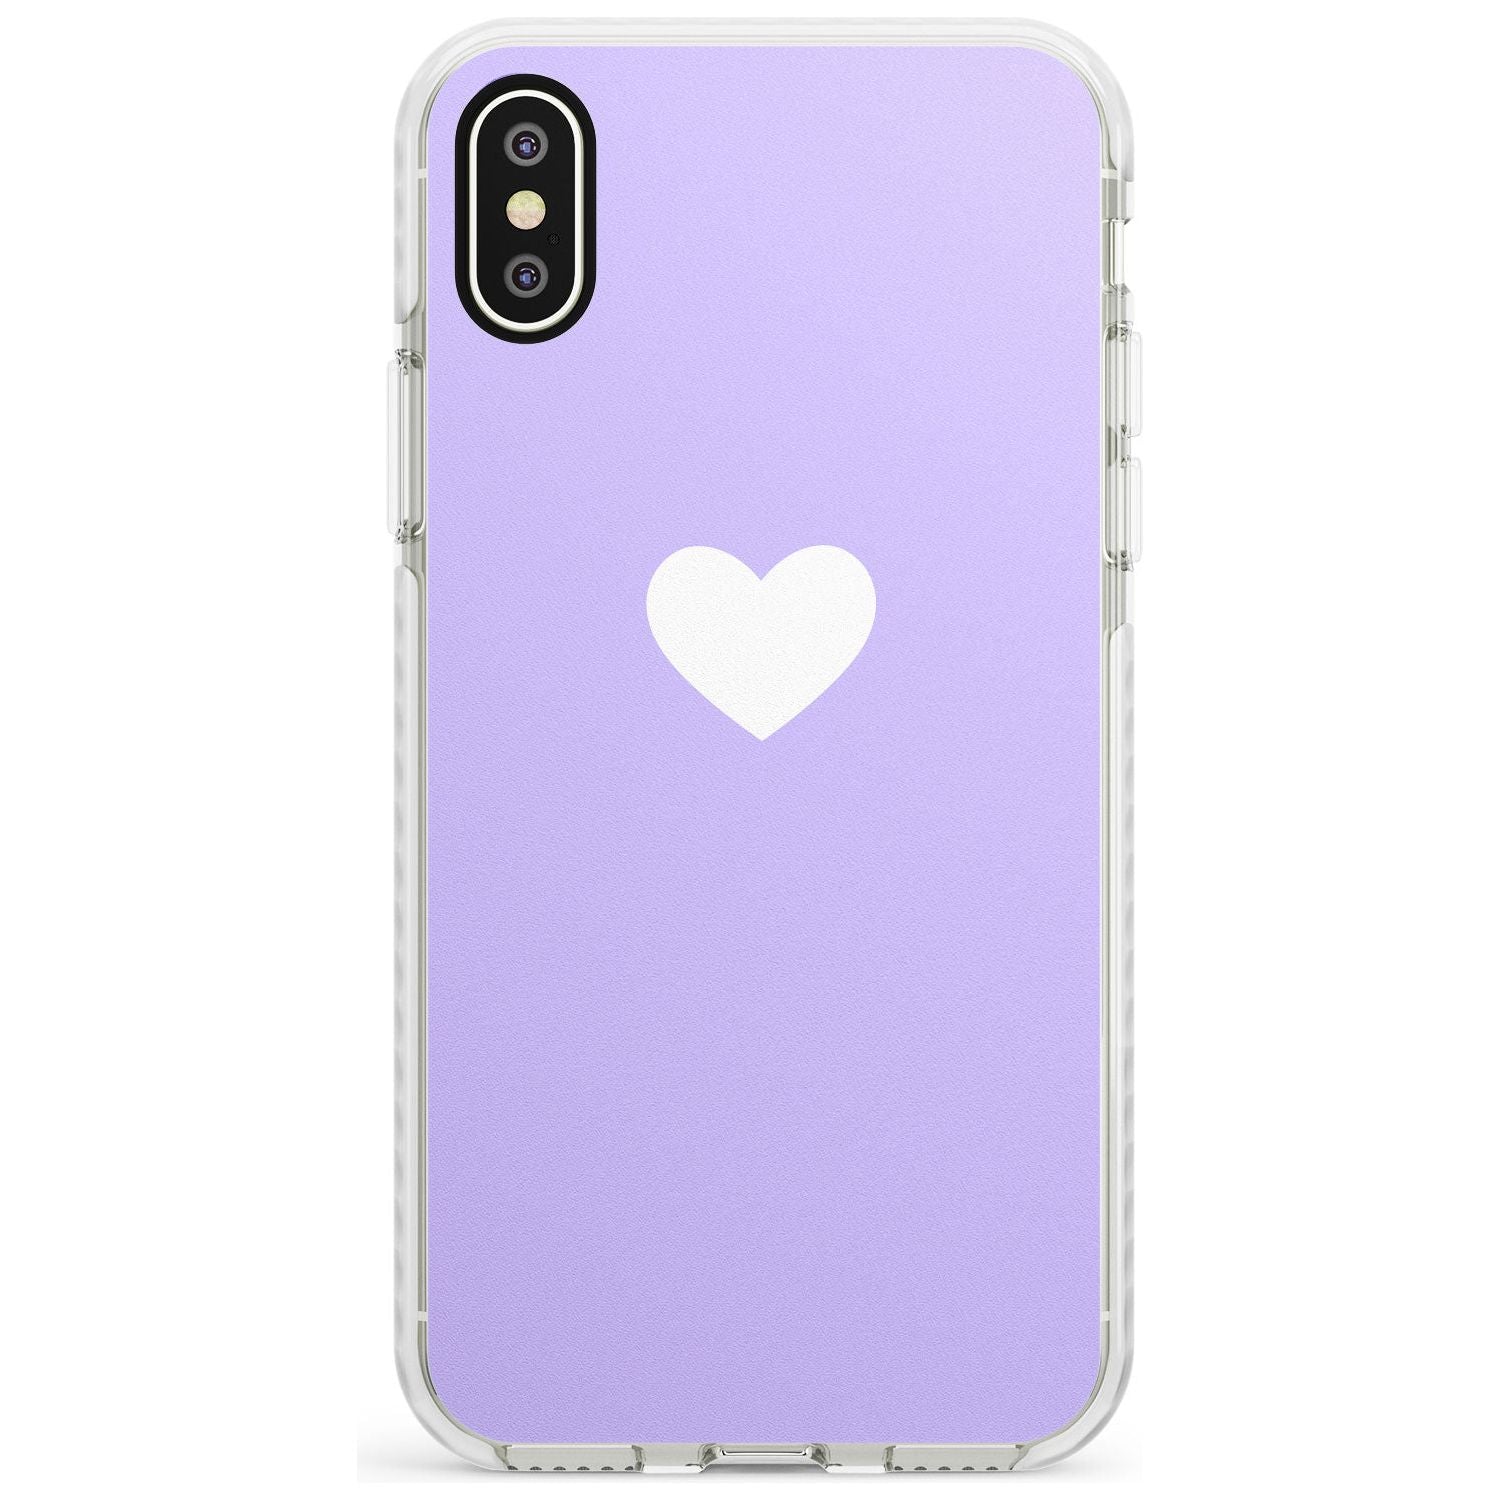 Single Heart White & Pale Purple Impact Phone Case for iPhone X XS Max XR